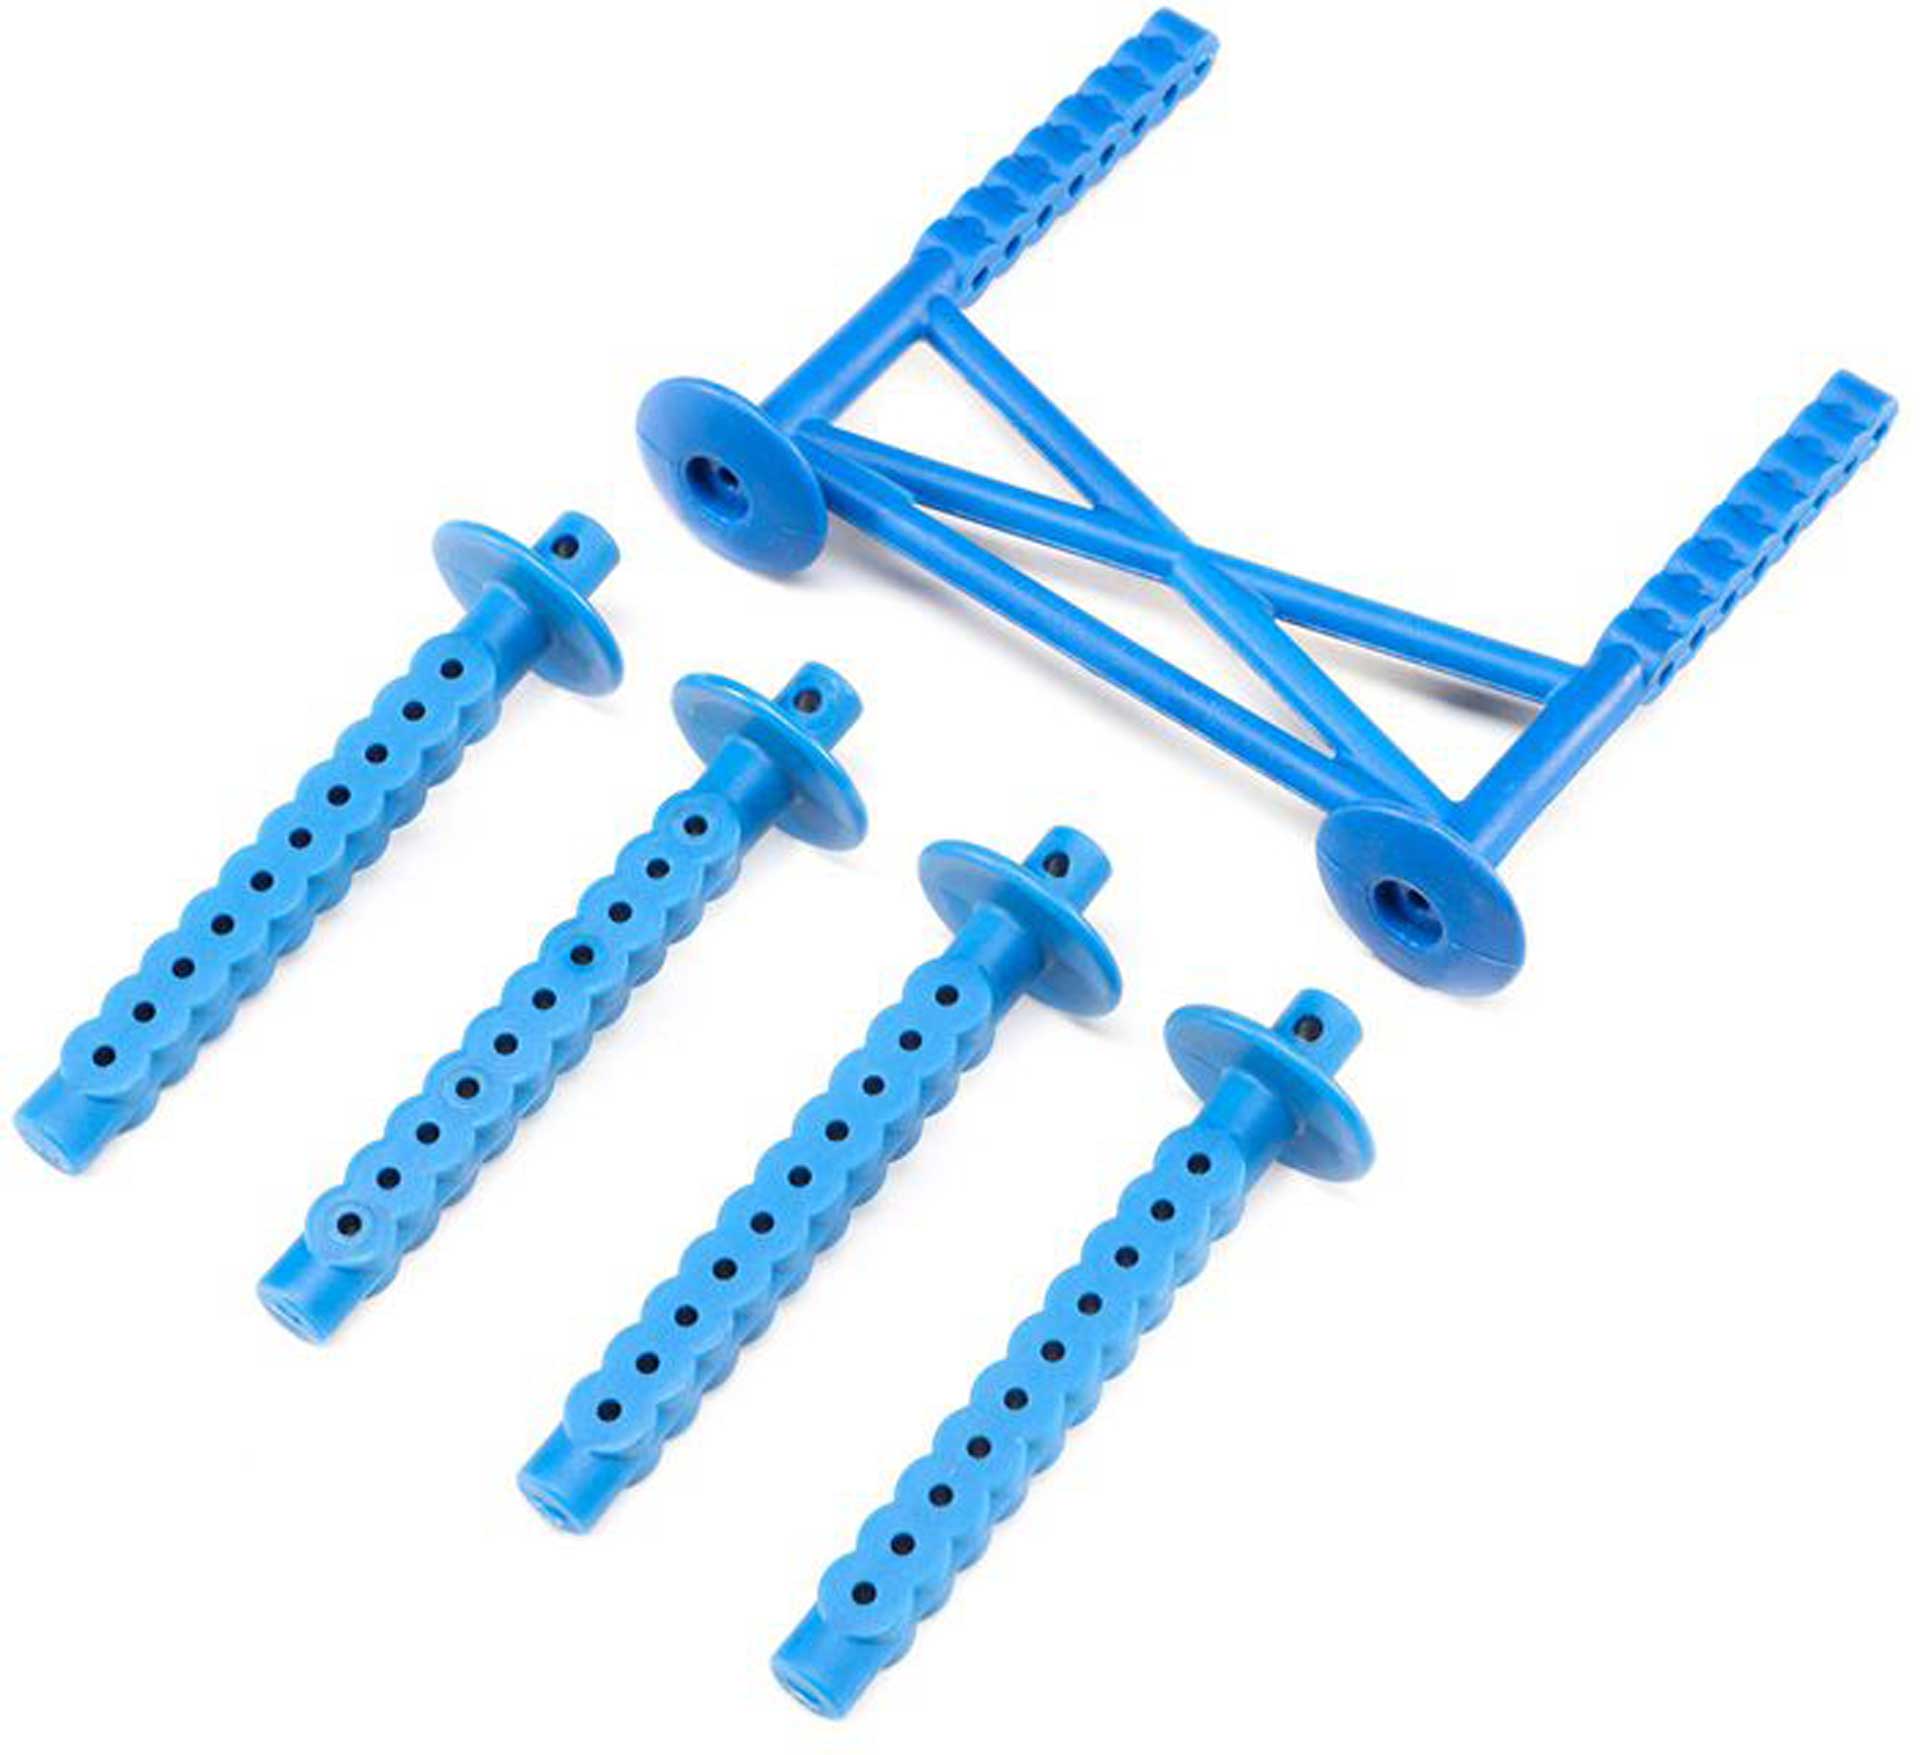 LOSI Rear Body Support and Body Posts, Blue: LMT